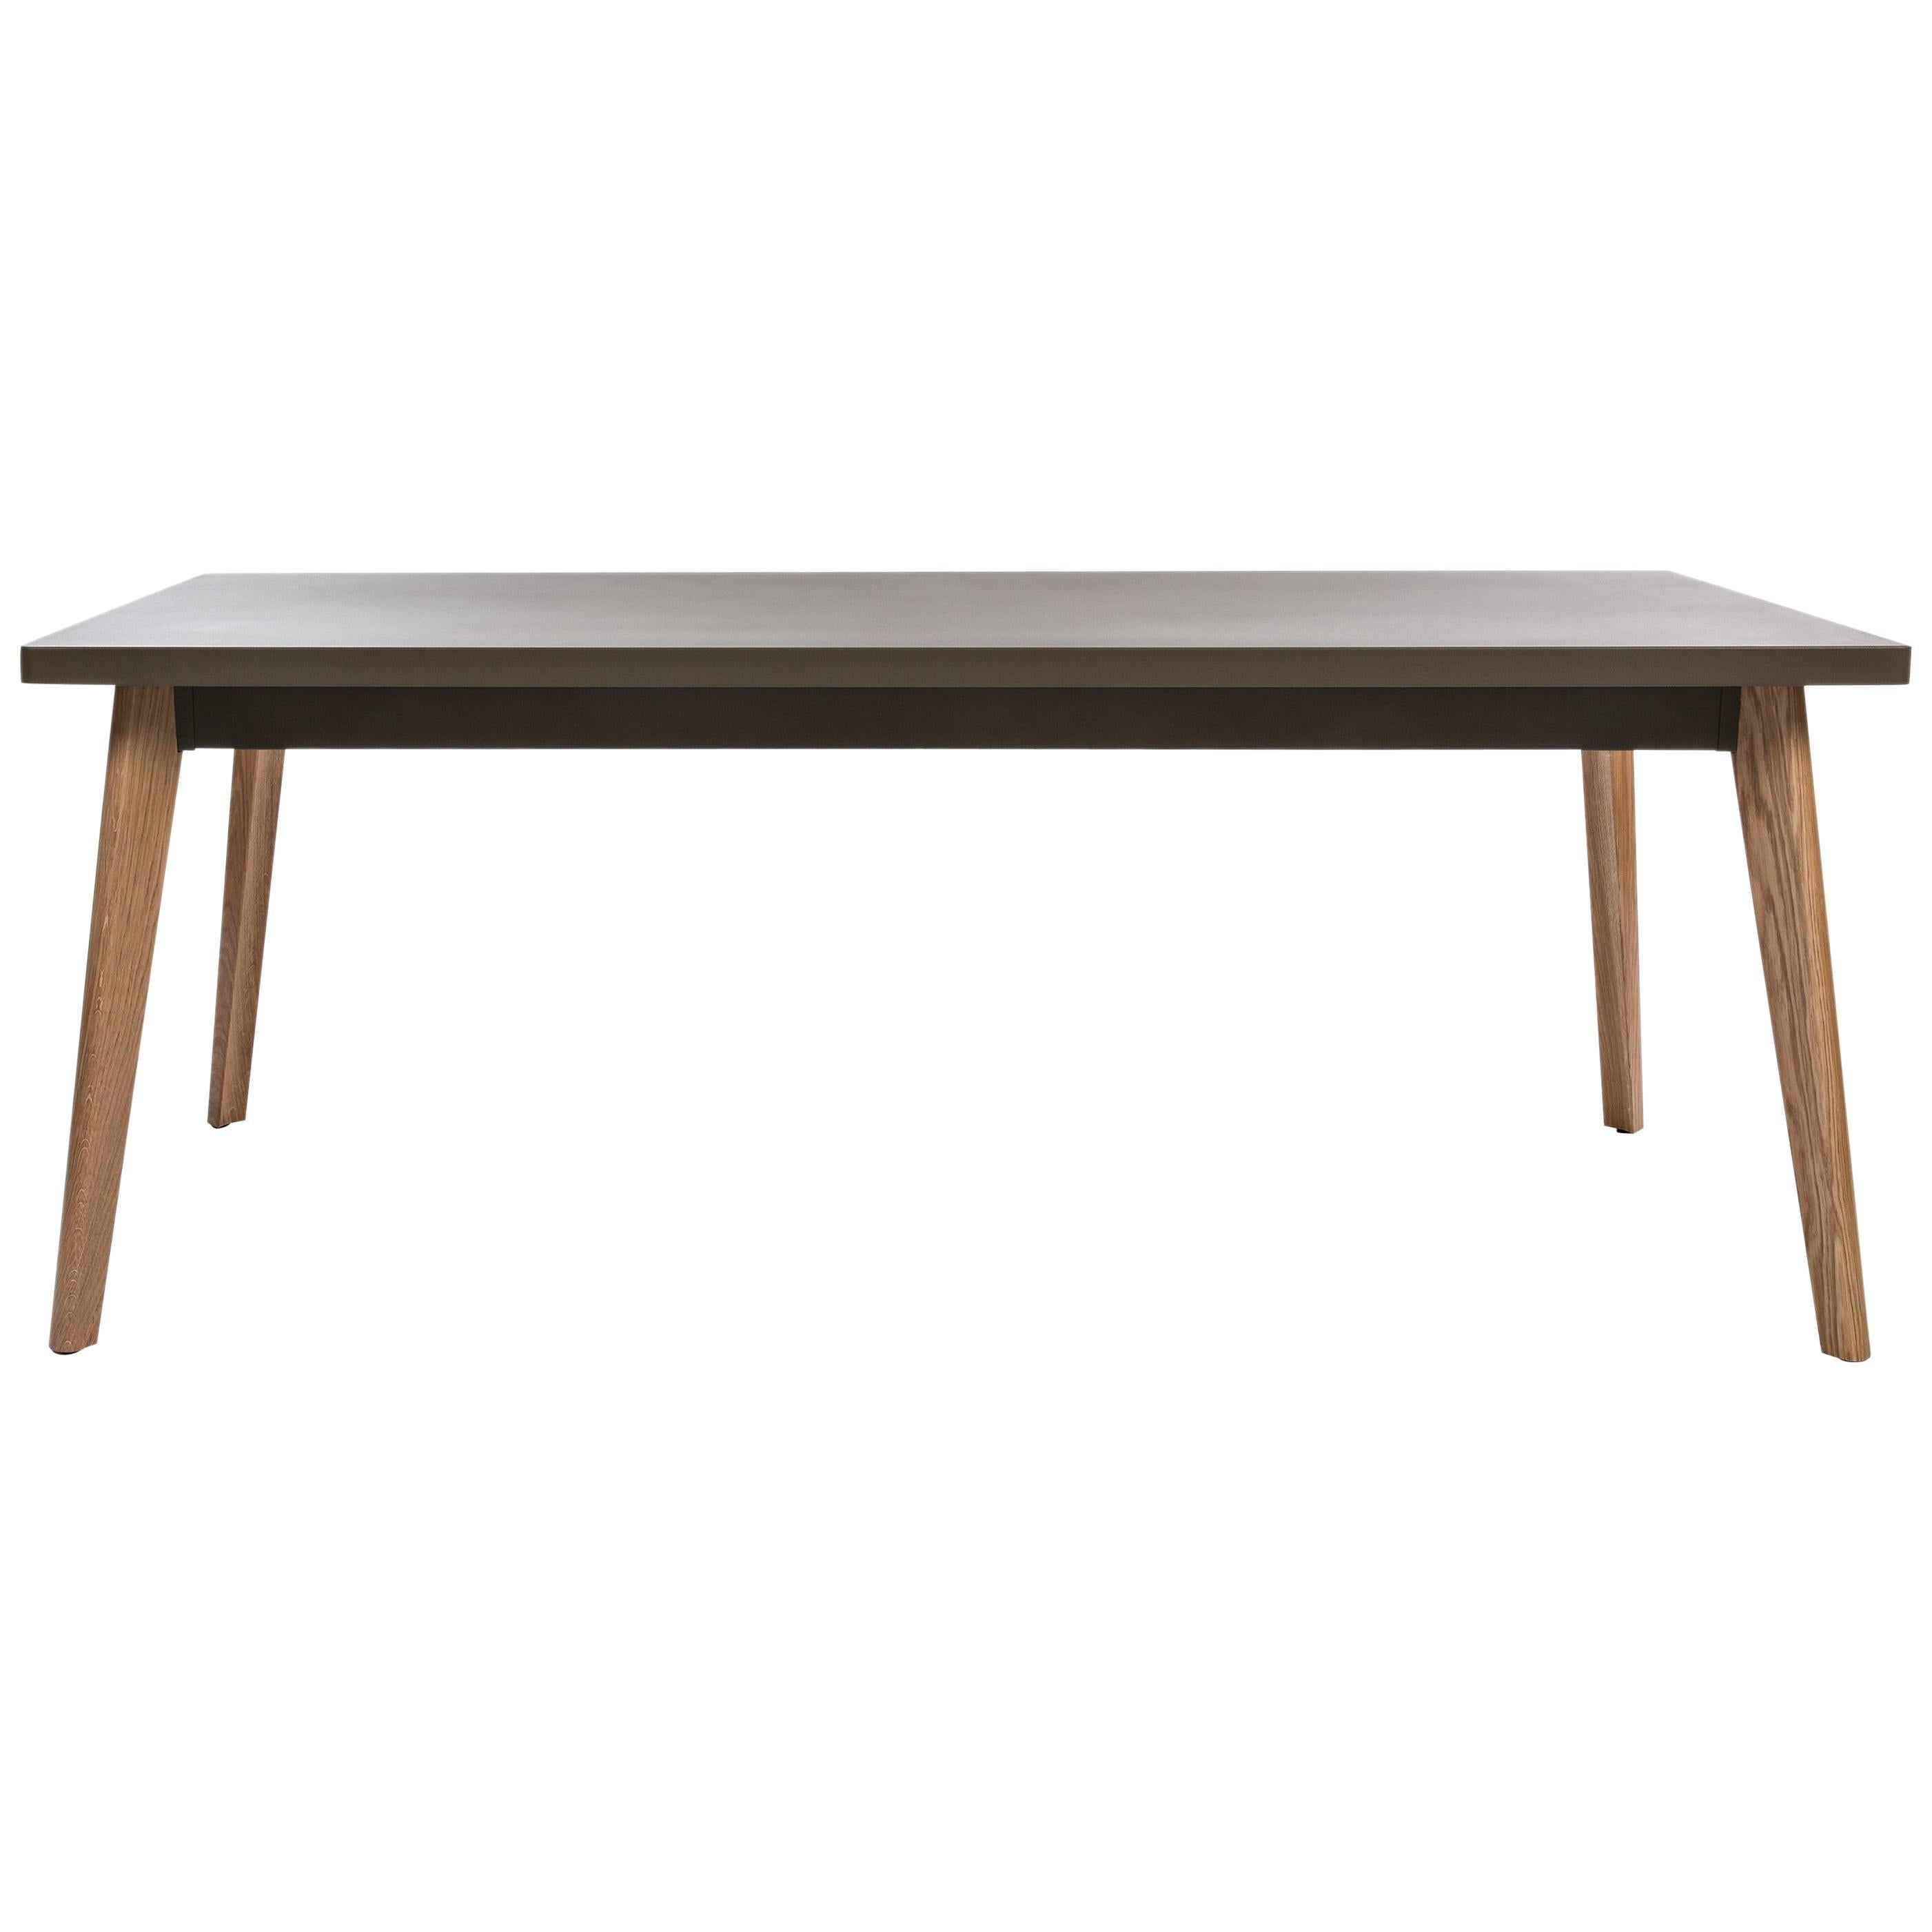 For Sale: Brown (Chocolat Noir) 55 Medium Table 80x190 with Wood Legs  by Jean Pauchard & Tolix